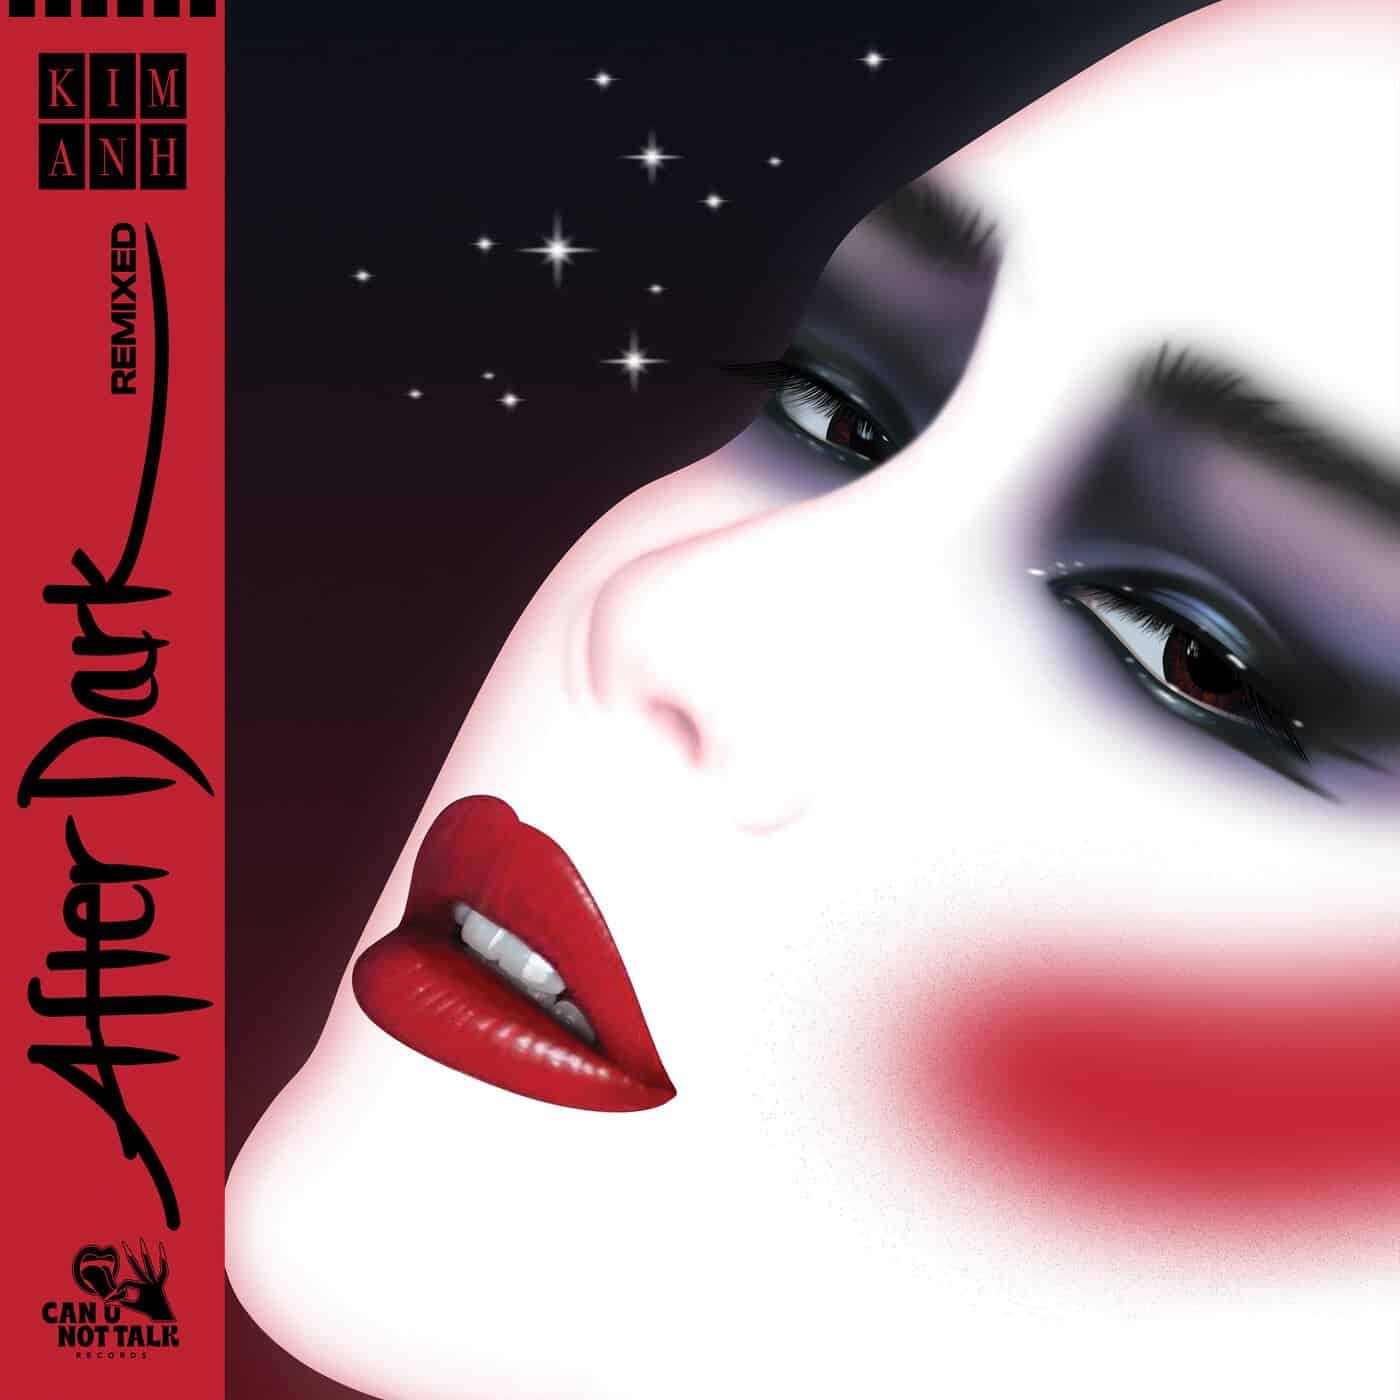 Download Kim Anh - After Dark Remixed on Electrobuzz